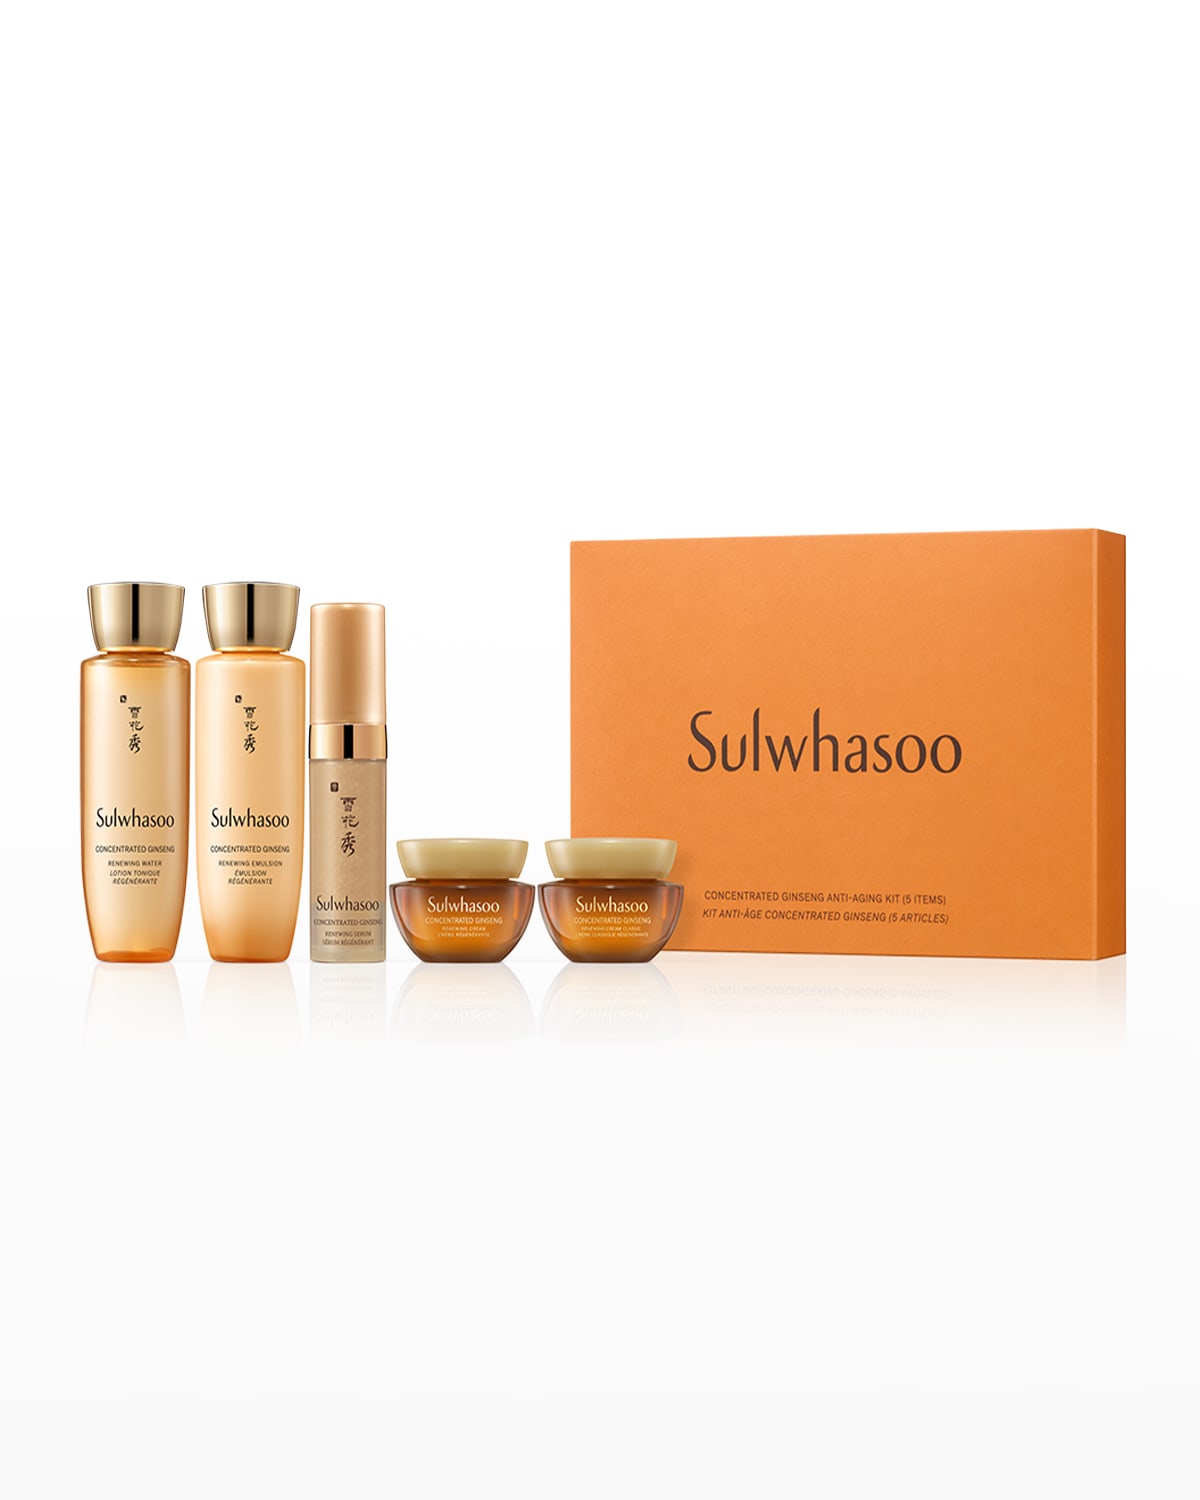 Concentrated Ginseng Anti-Aging Kit, Yours with any $250 Sulwhasoo Purchase